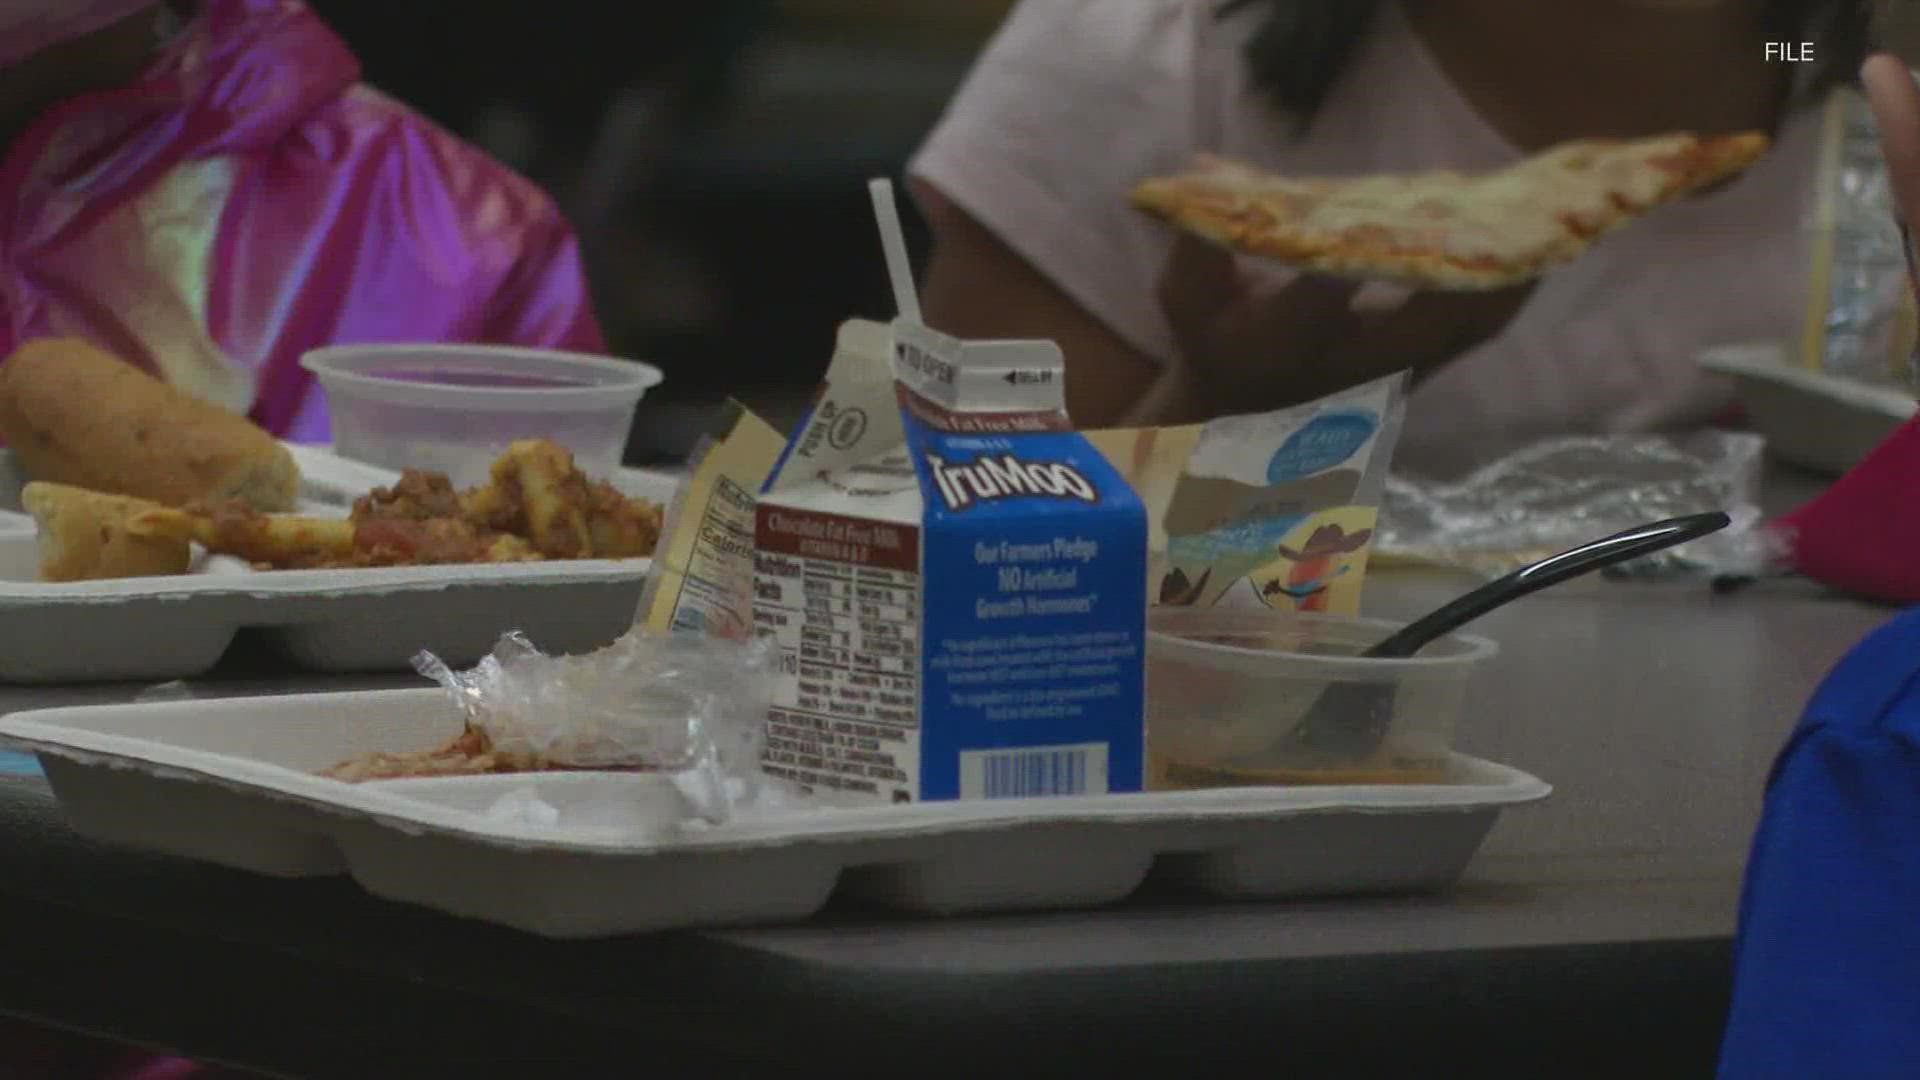 Legislators decided not to renew the program. Some Jefferson County Public Schools automatically qualify students for free or reduced lunches.